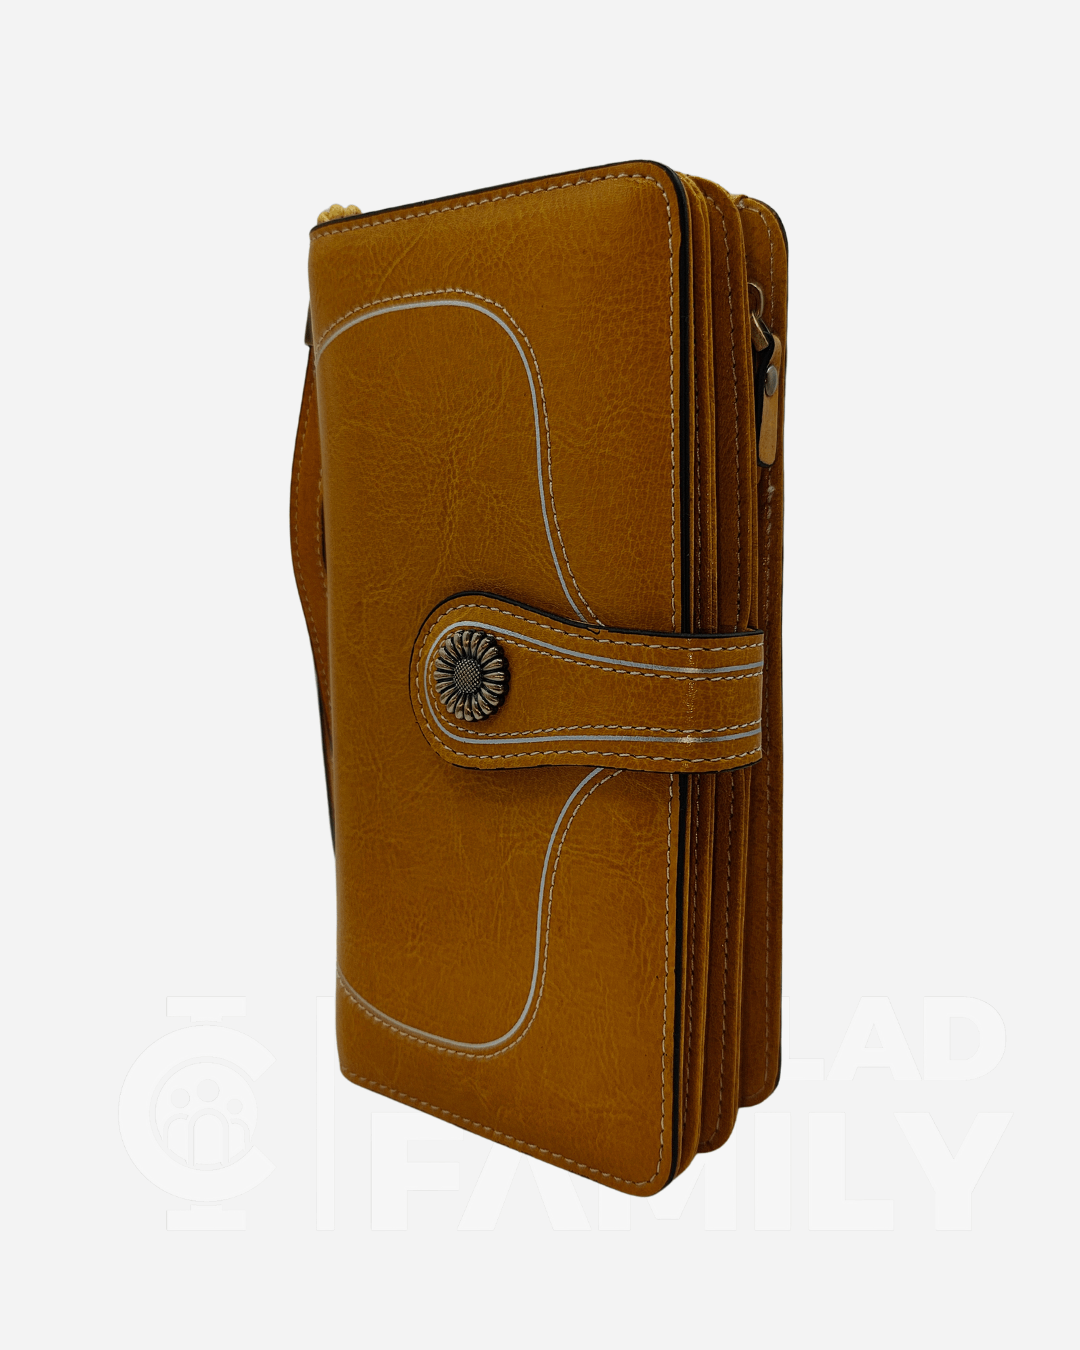 RFID blocking tan leather wallet equipped with a zipper